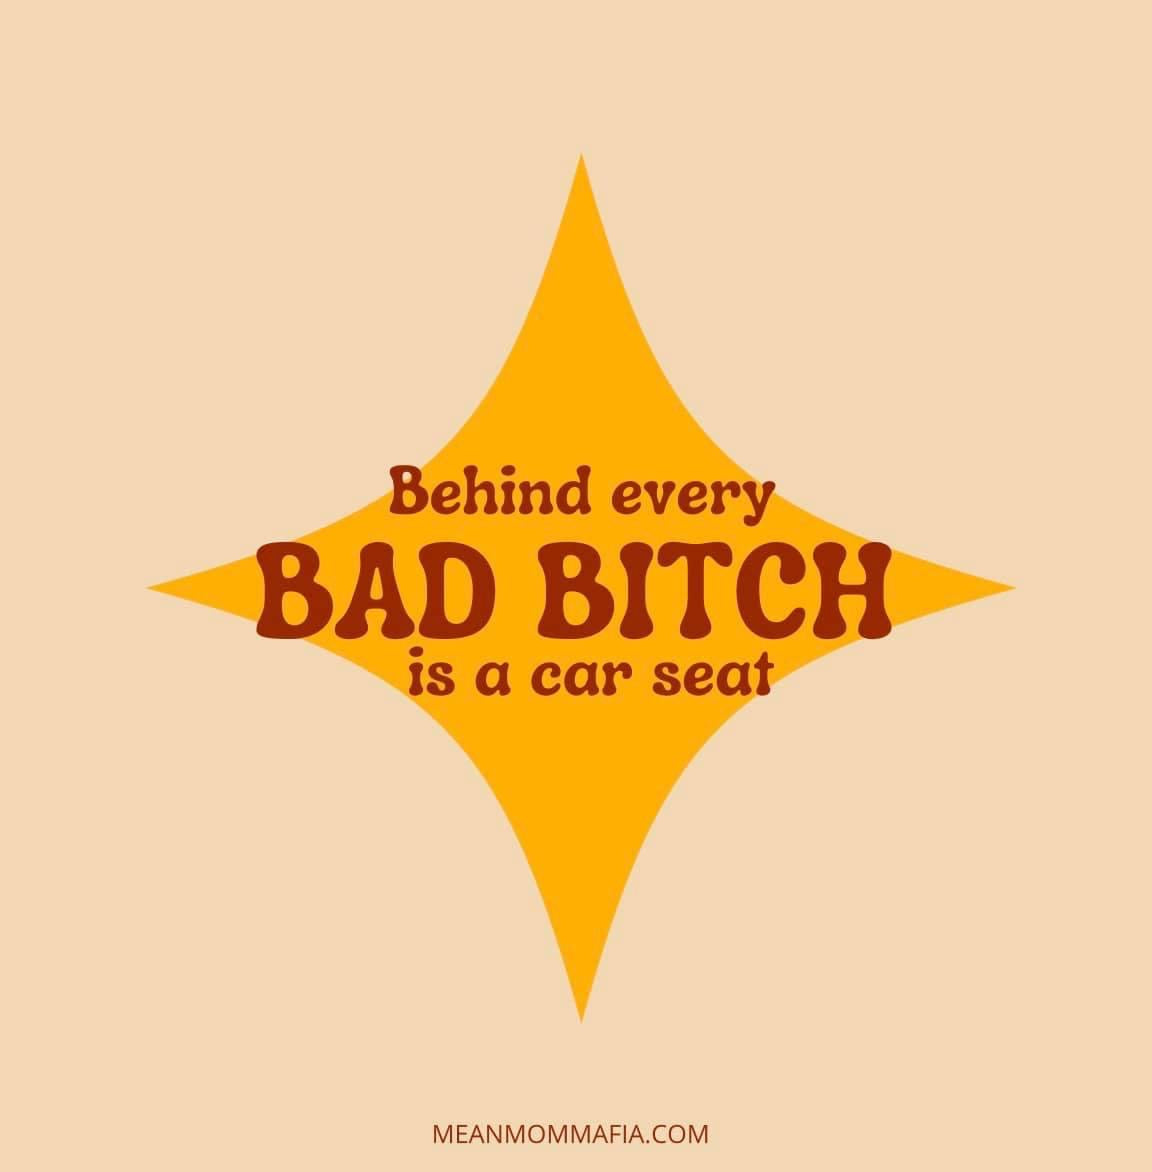 “Behind every Bad Bitch is a car seat” Sticker